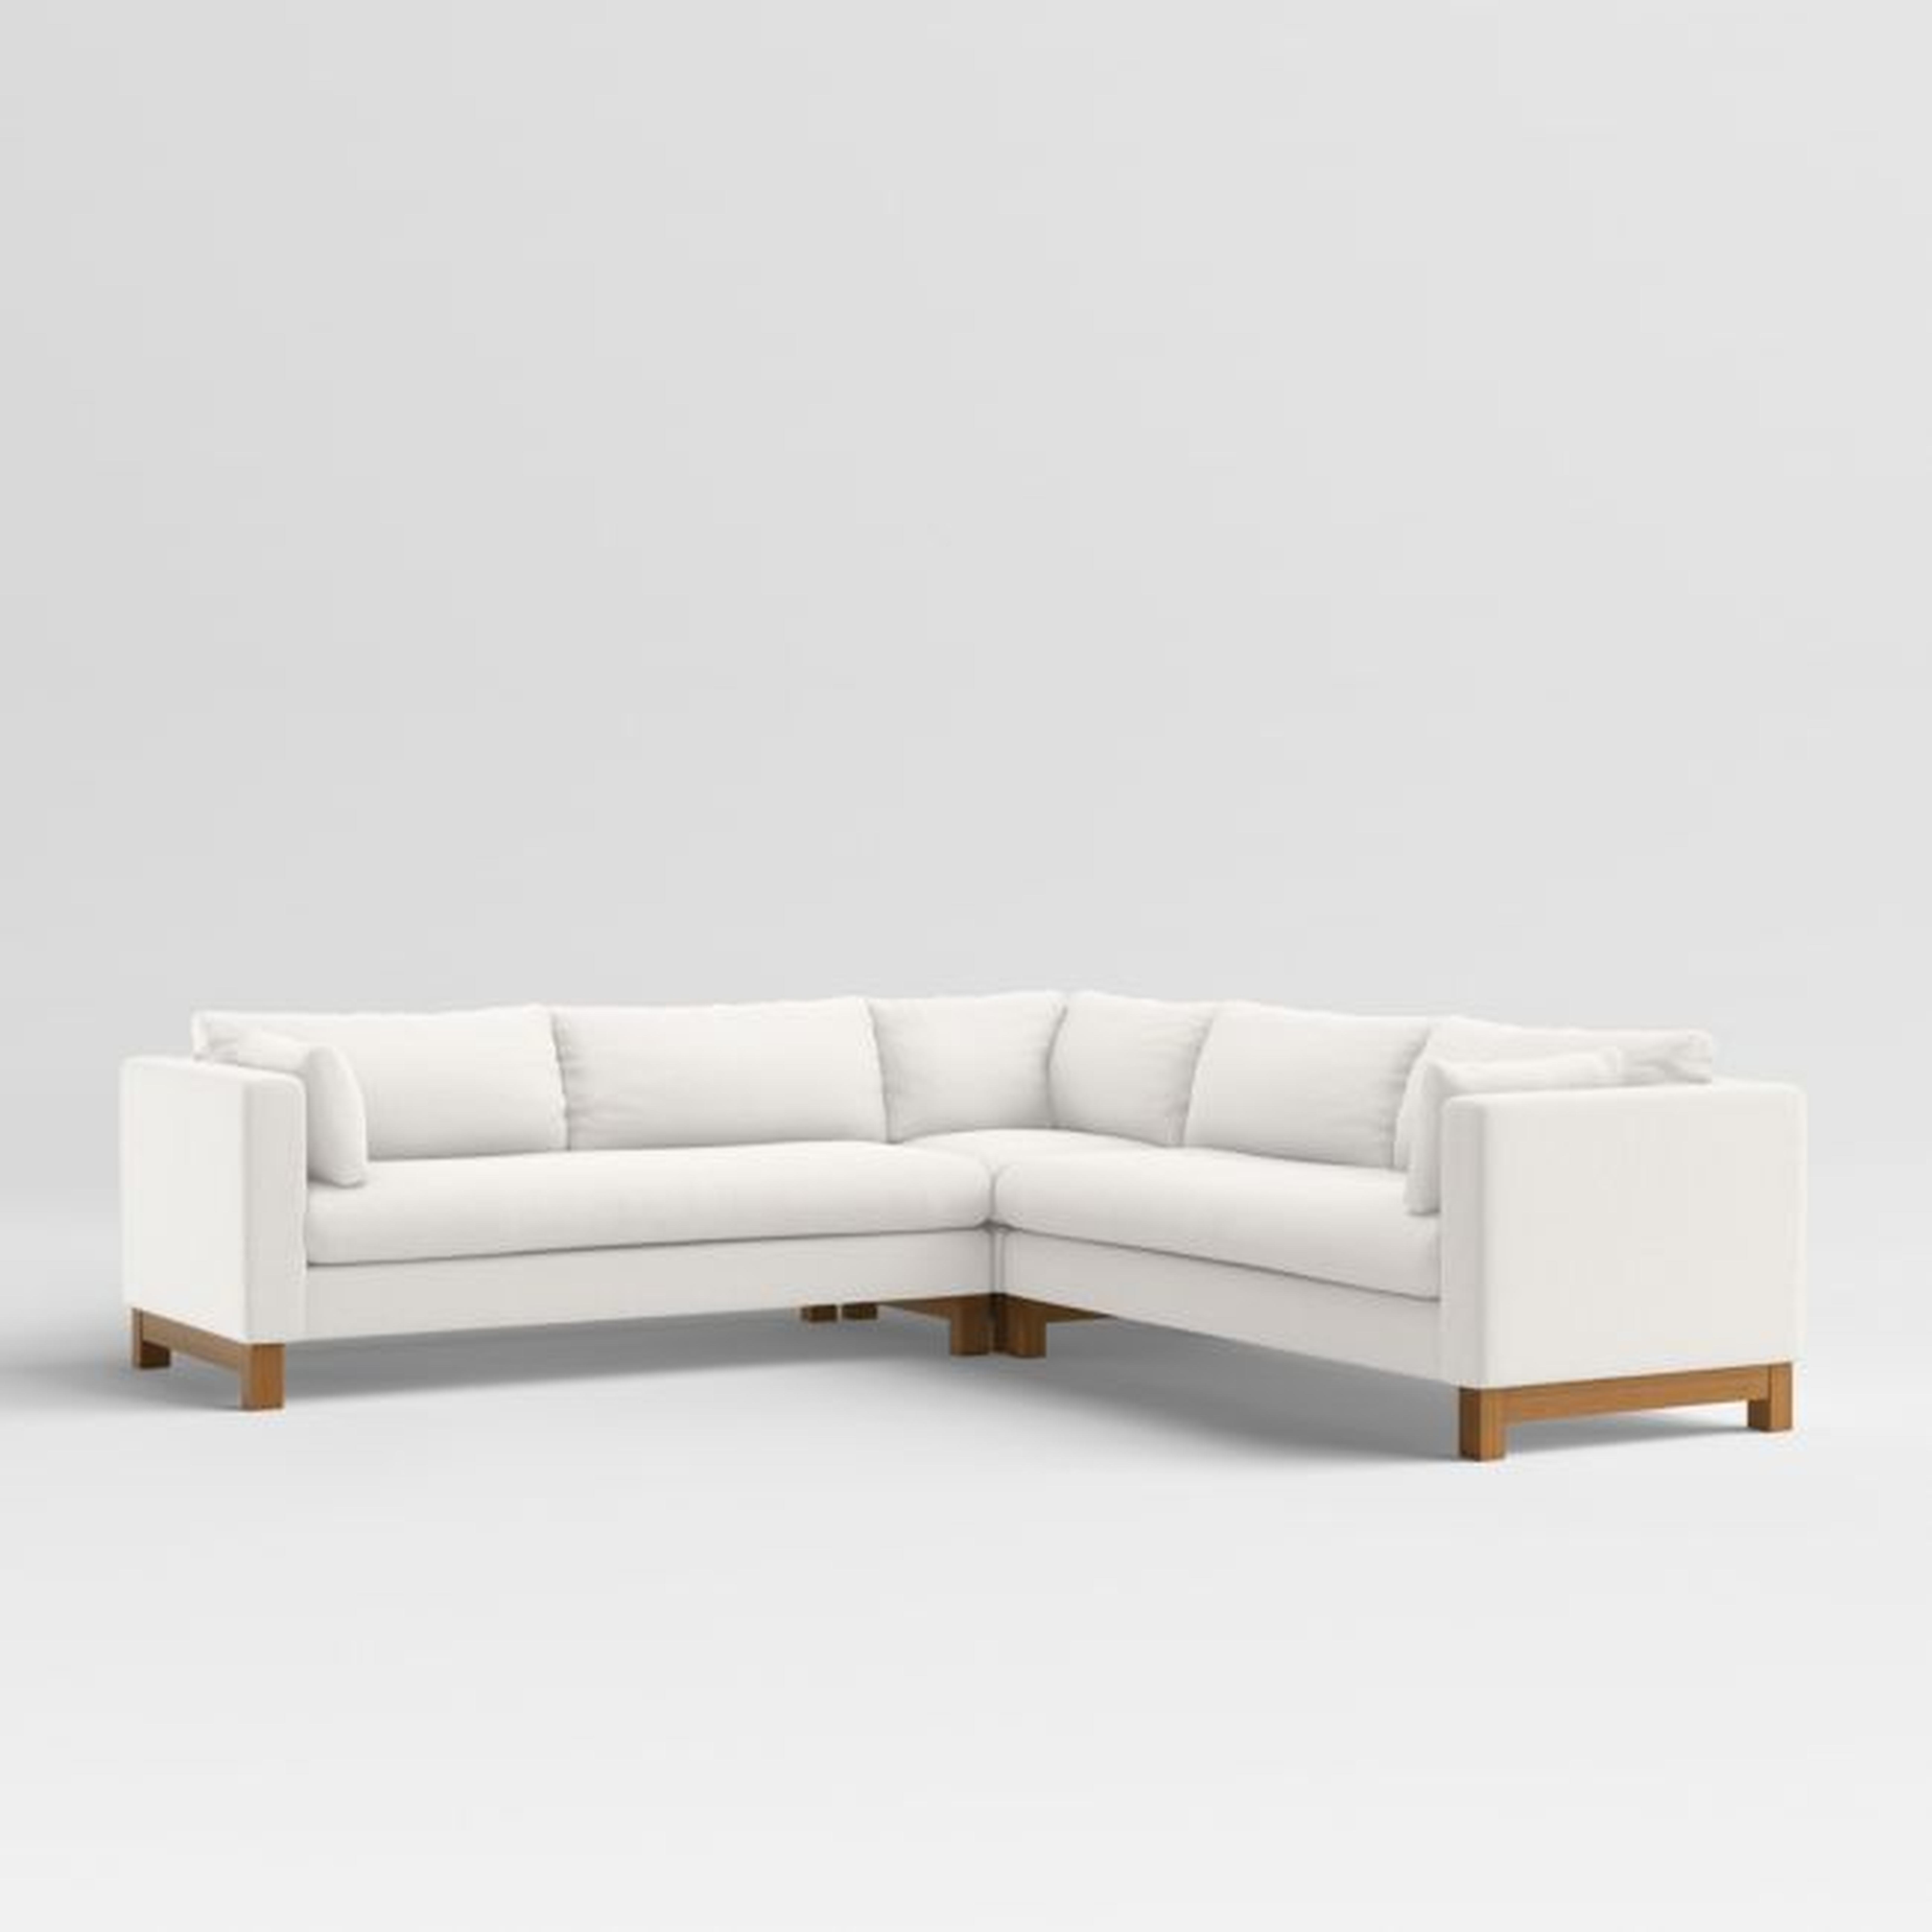 Pacific Bench 3-Piece L-Shaped Sectional Sofa with Wood Legs - Crate and Barrel